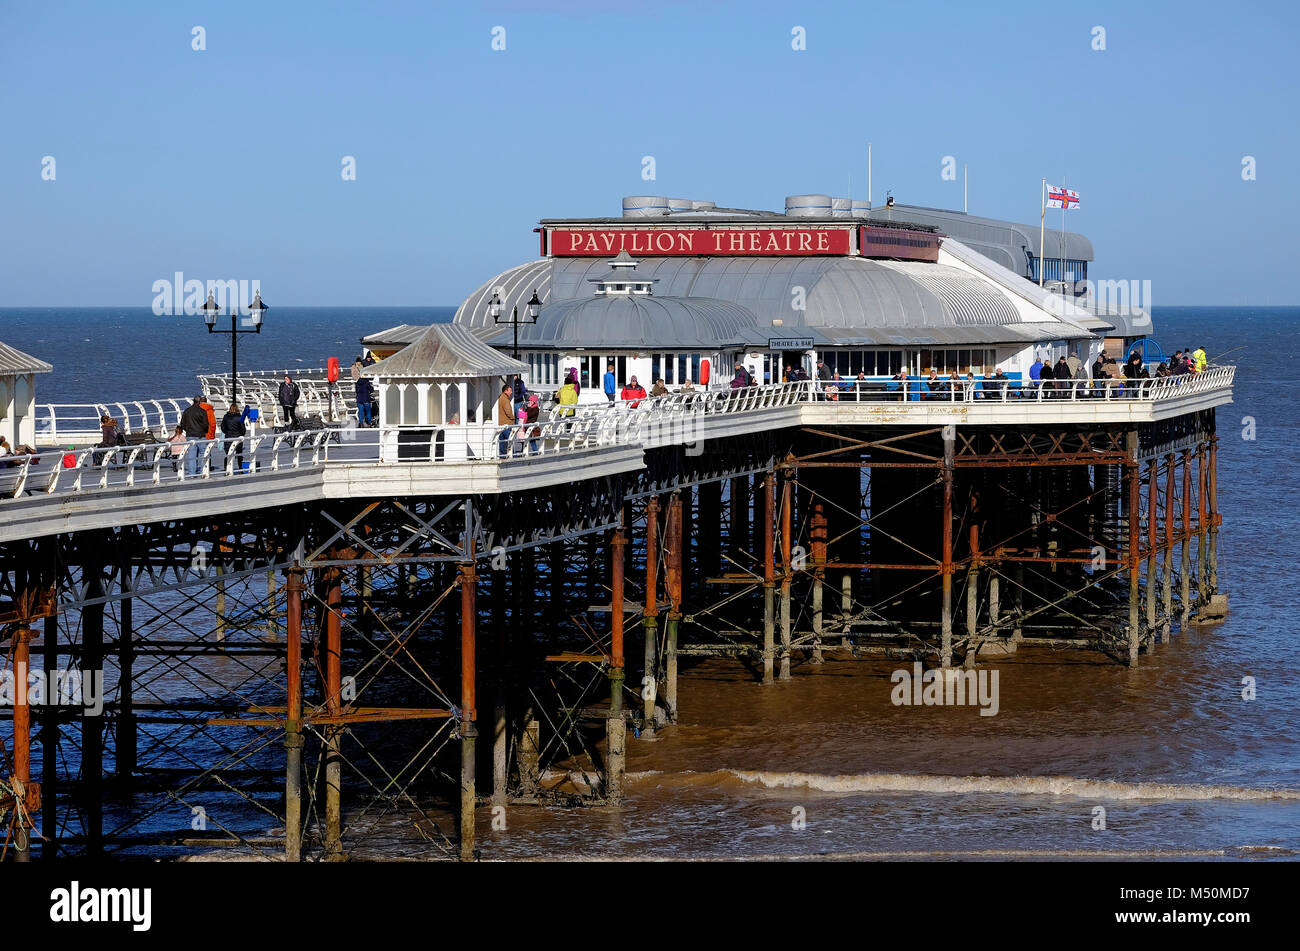 cromer pier and pavilion theatre, north norfolk, england Stock Photo